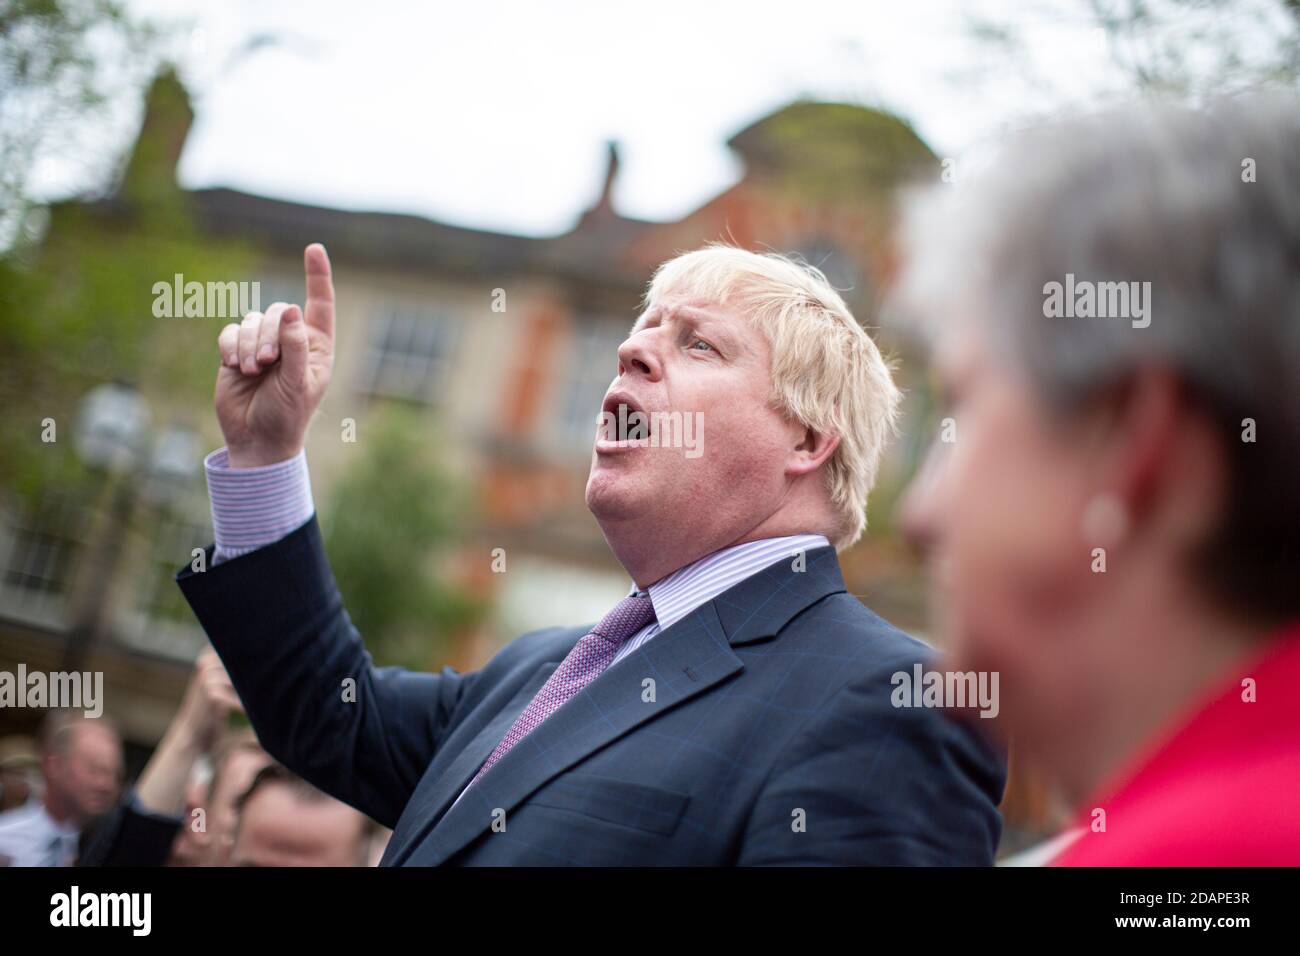 Boris Johnson and his Battle Bus on the BREXIT referendum campaign in Stafford, England. Johnson was later to become Prime Minister with Cummings Stock Photo